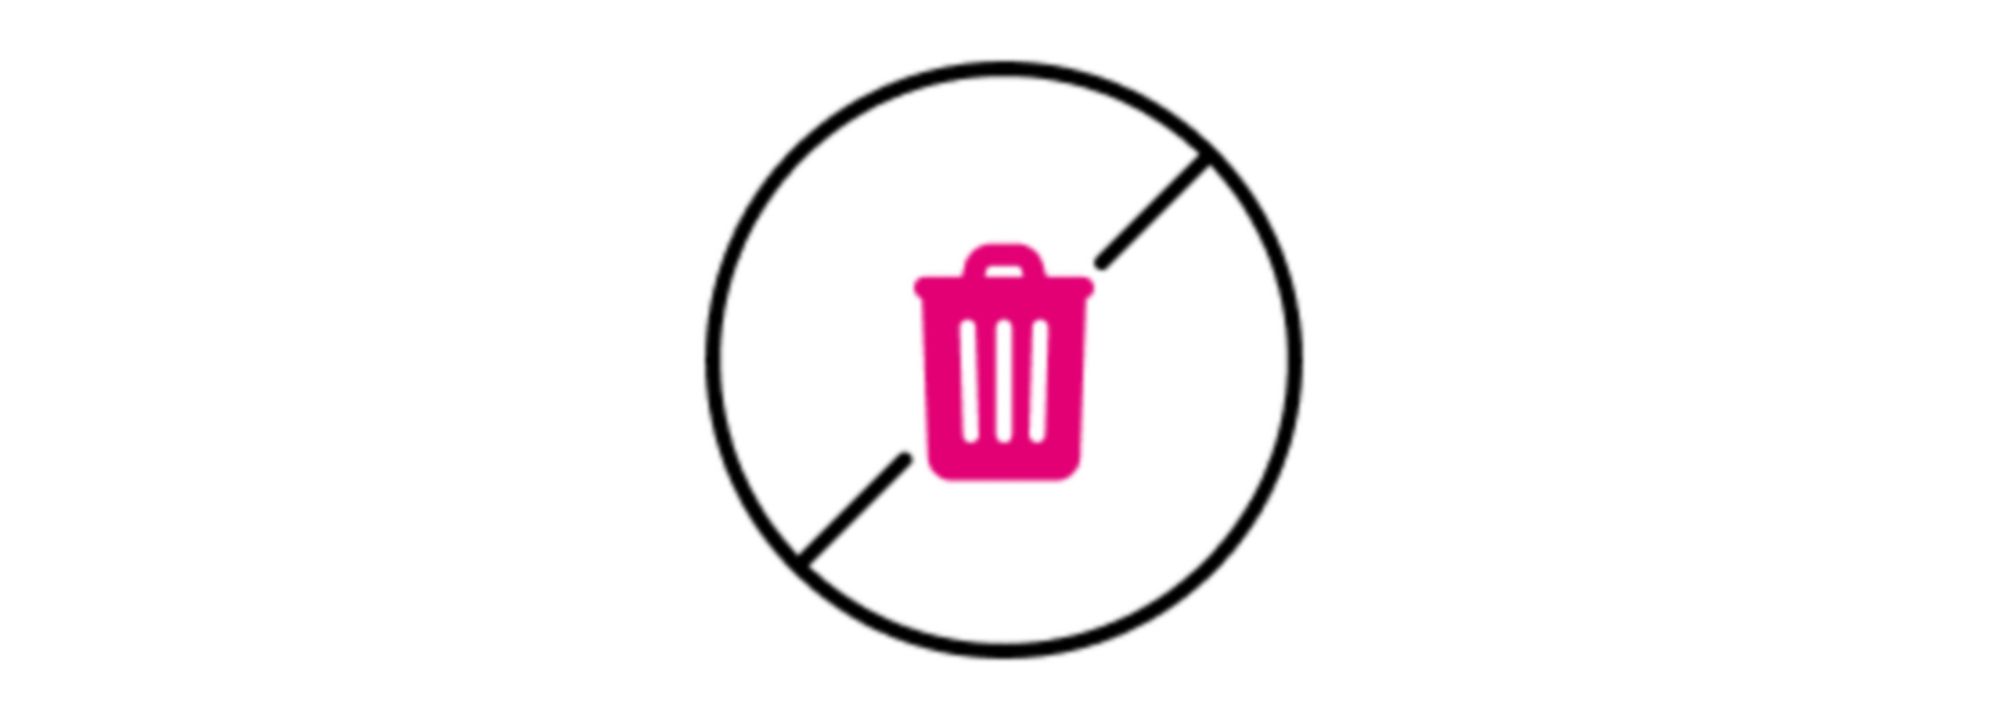 Icon of a circle with a diagonal slash covering a trash can, symbolizing a “Do Not Dispose” sign.